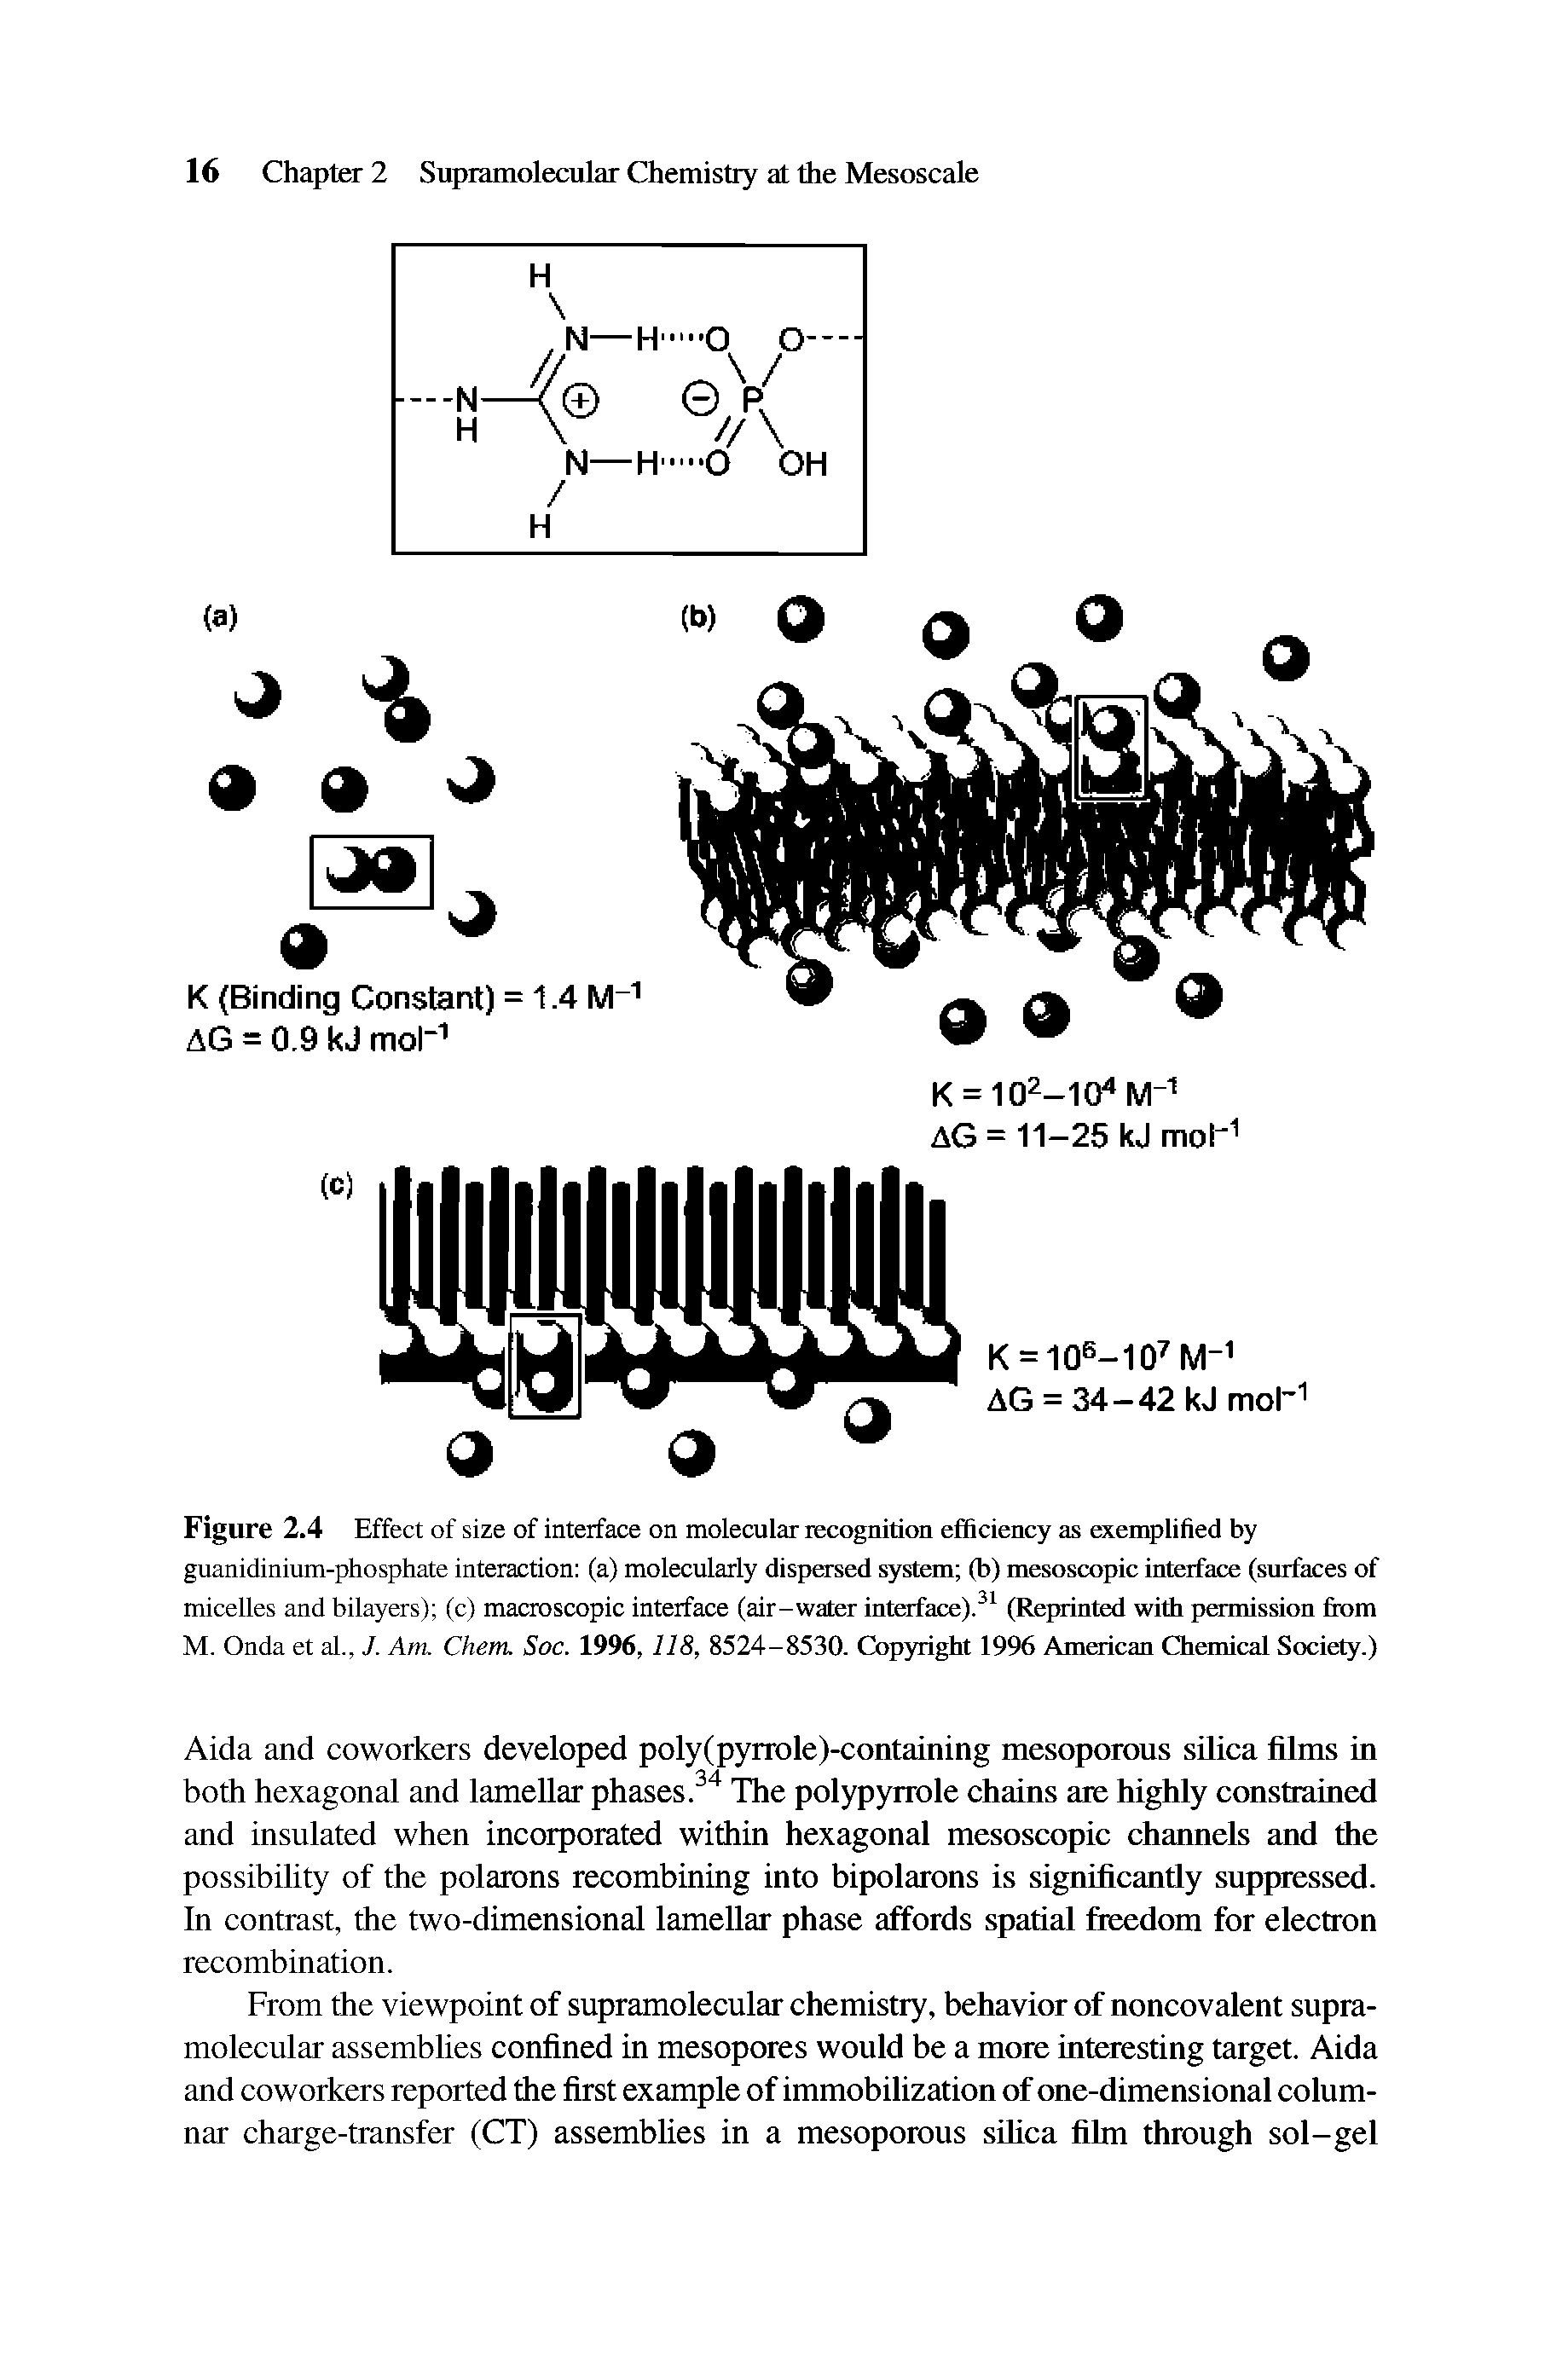 Figure 2.4 Effect of size of interface on molecular recognition efficiency as exemplified by guanidinium-phosphate interaction (a) molecularly dispersed system (b) mesoscopic interface (surfaces of micelles and bilayers) (c) macroscopic interface (air-water interface).31 (Reprinted with permission from...